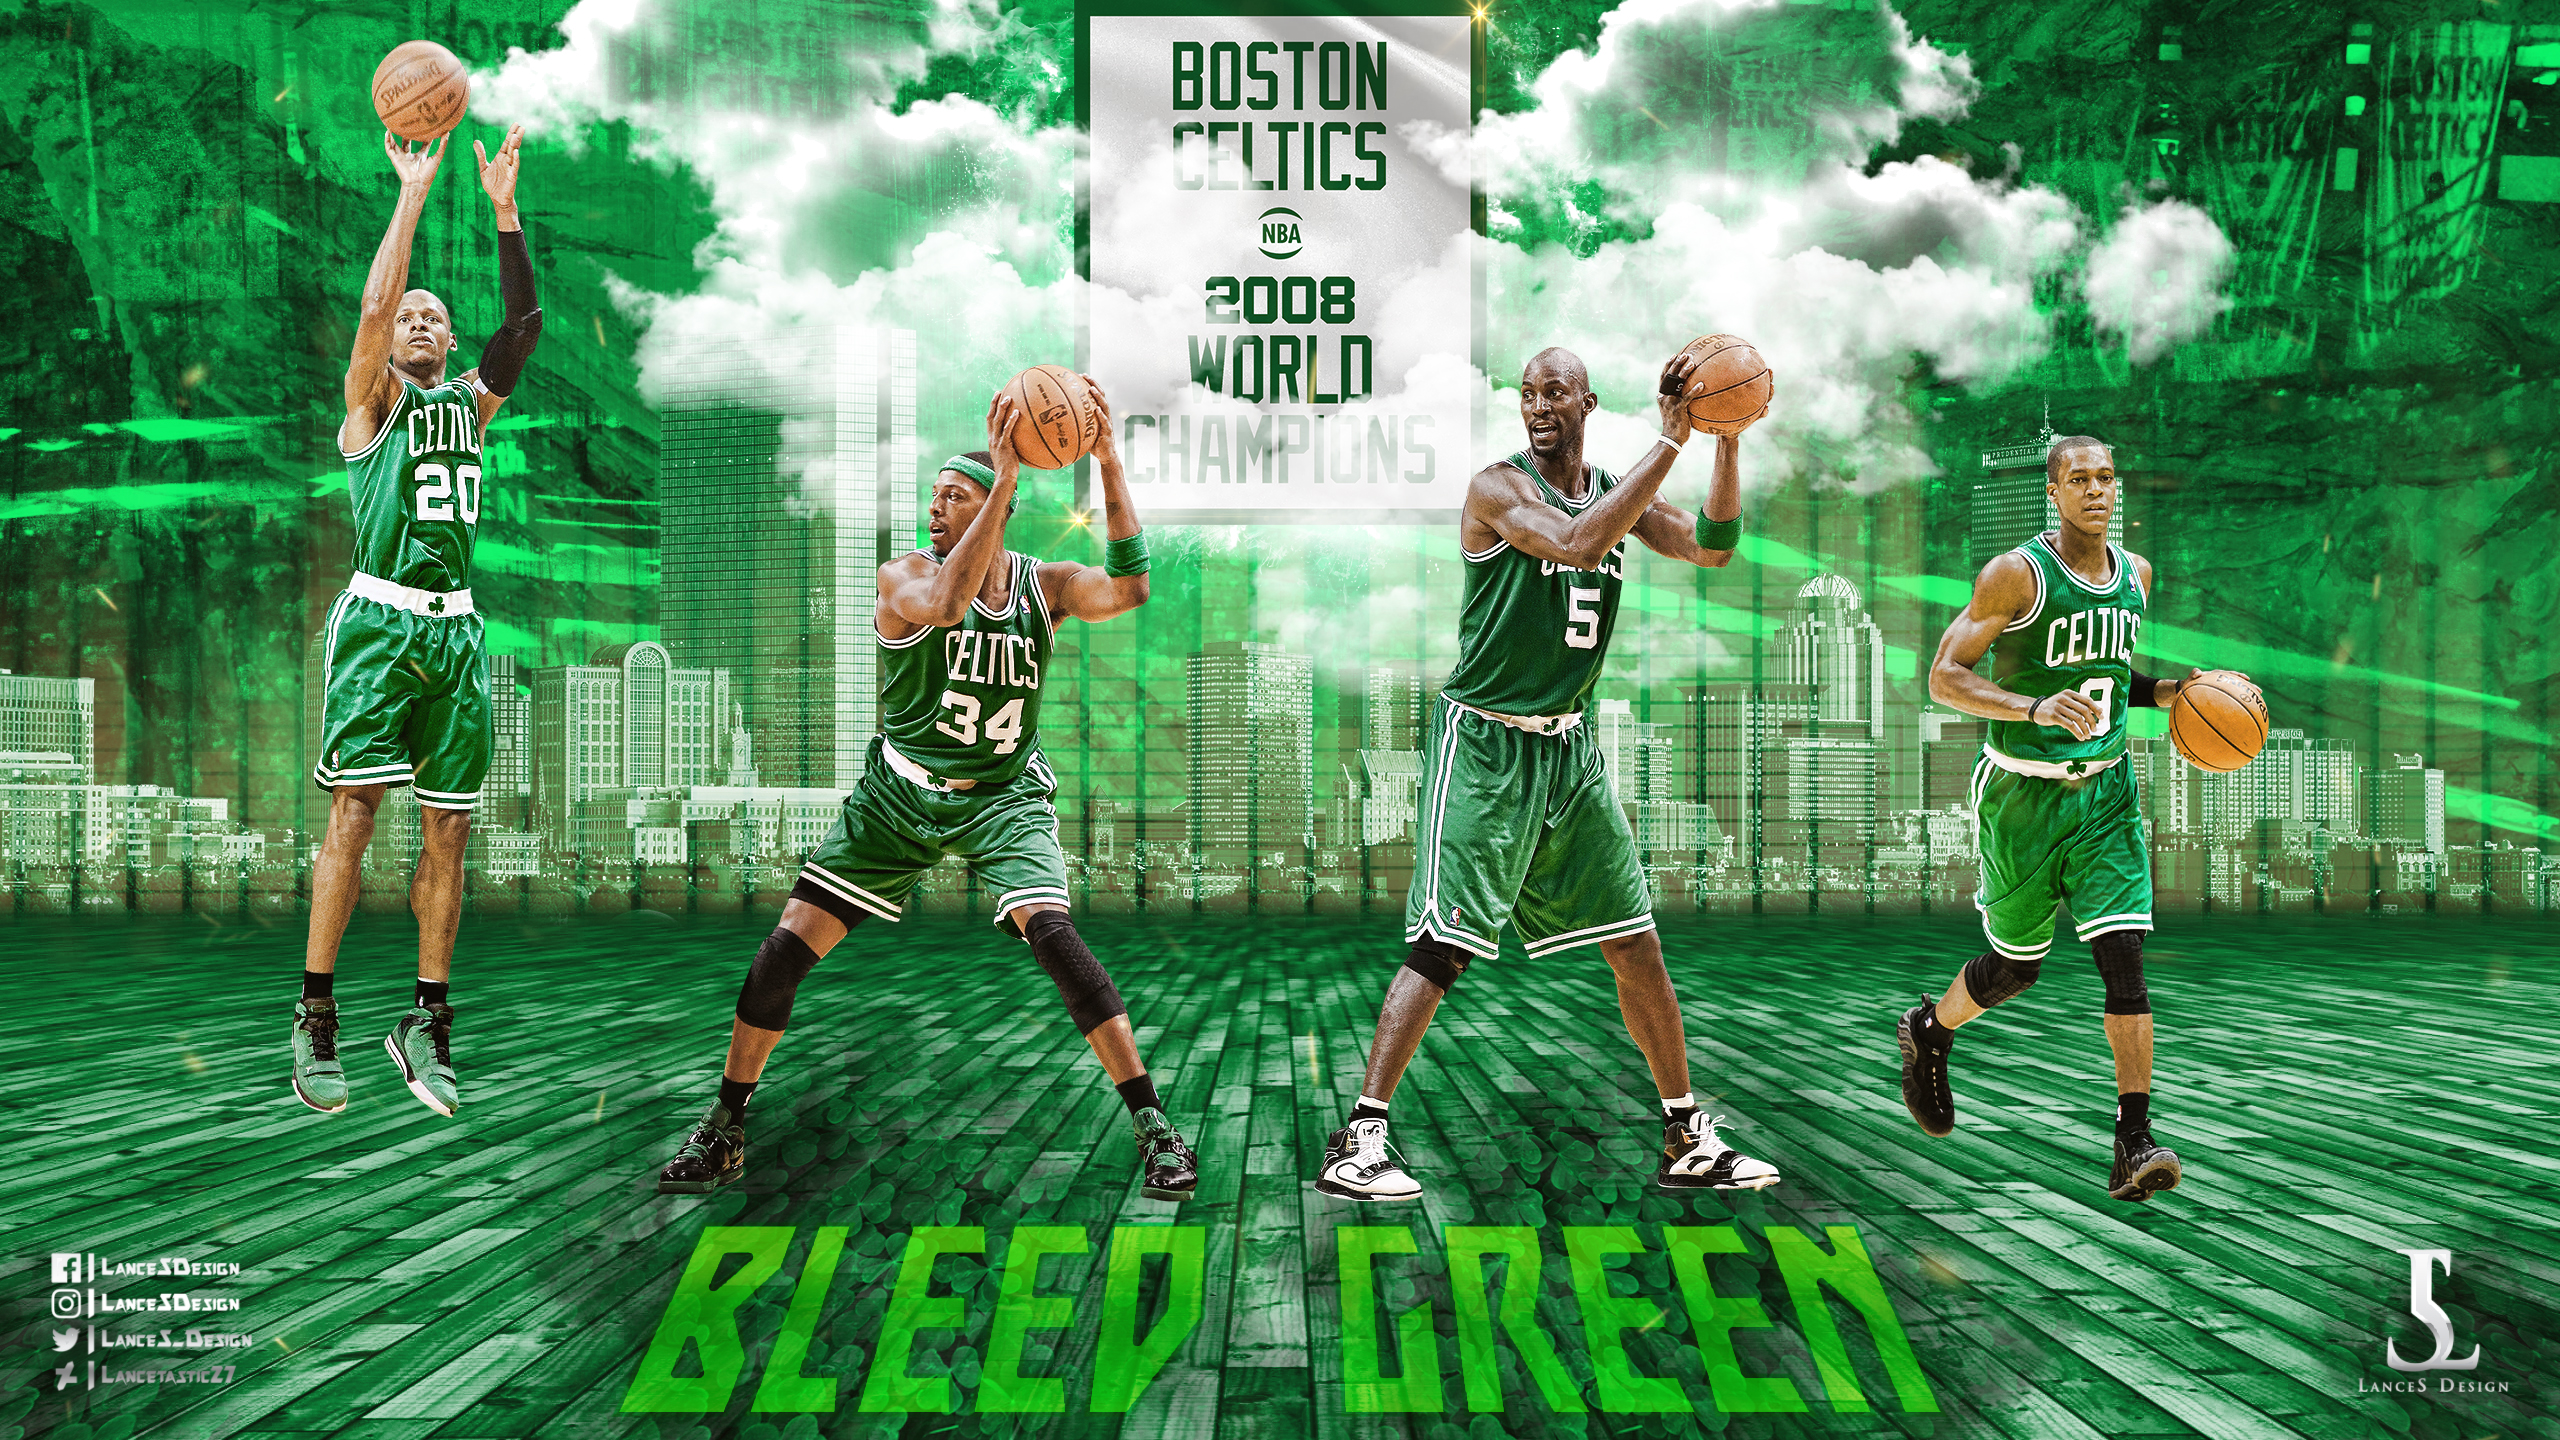 Download The Boston Celtics And The Jays Are In The Finals  Wallpaperscom